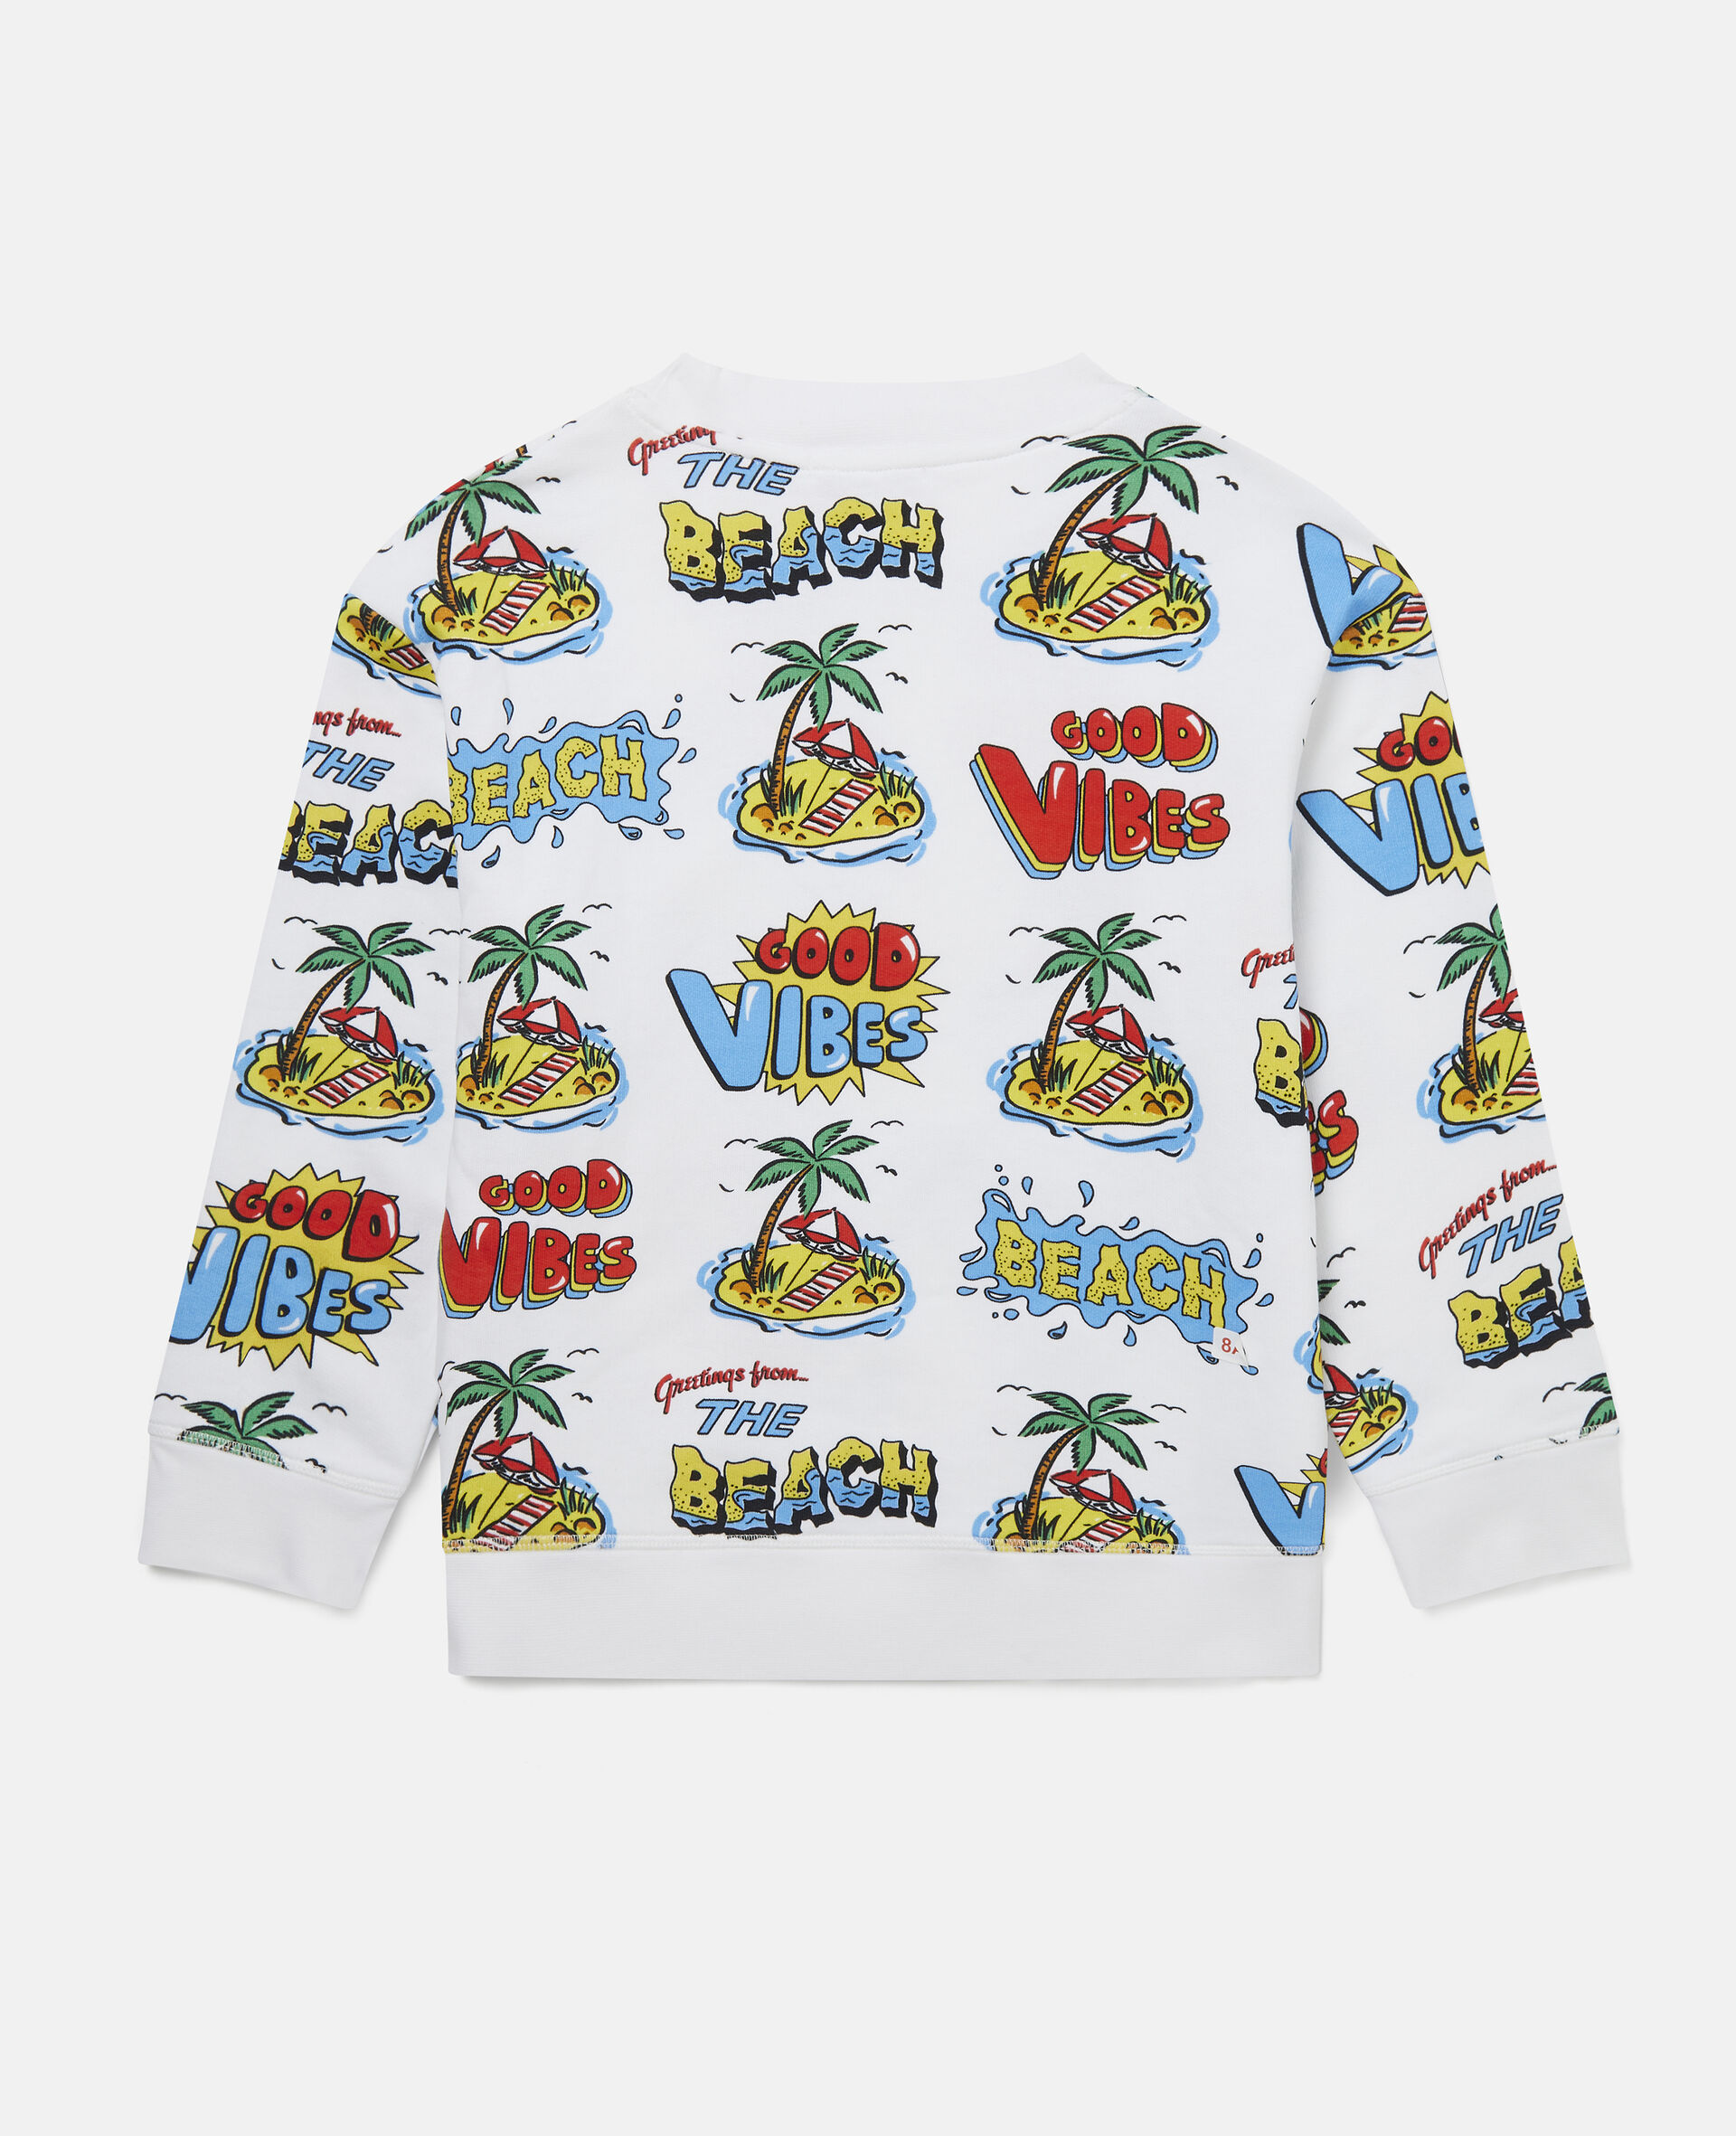 Good Vibes Print All Over Cotton Fleece Sweatshirt -White-large image number 2